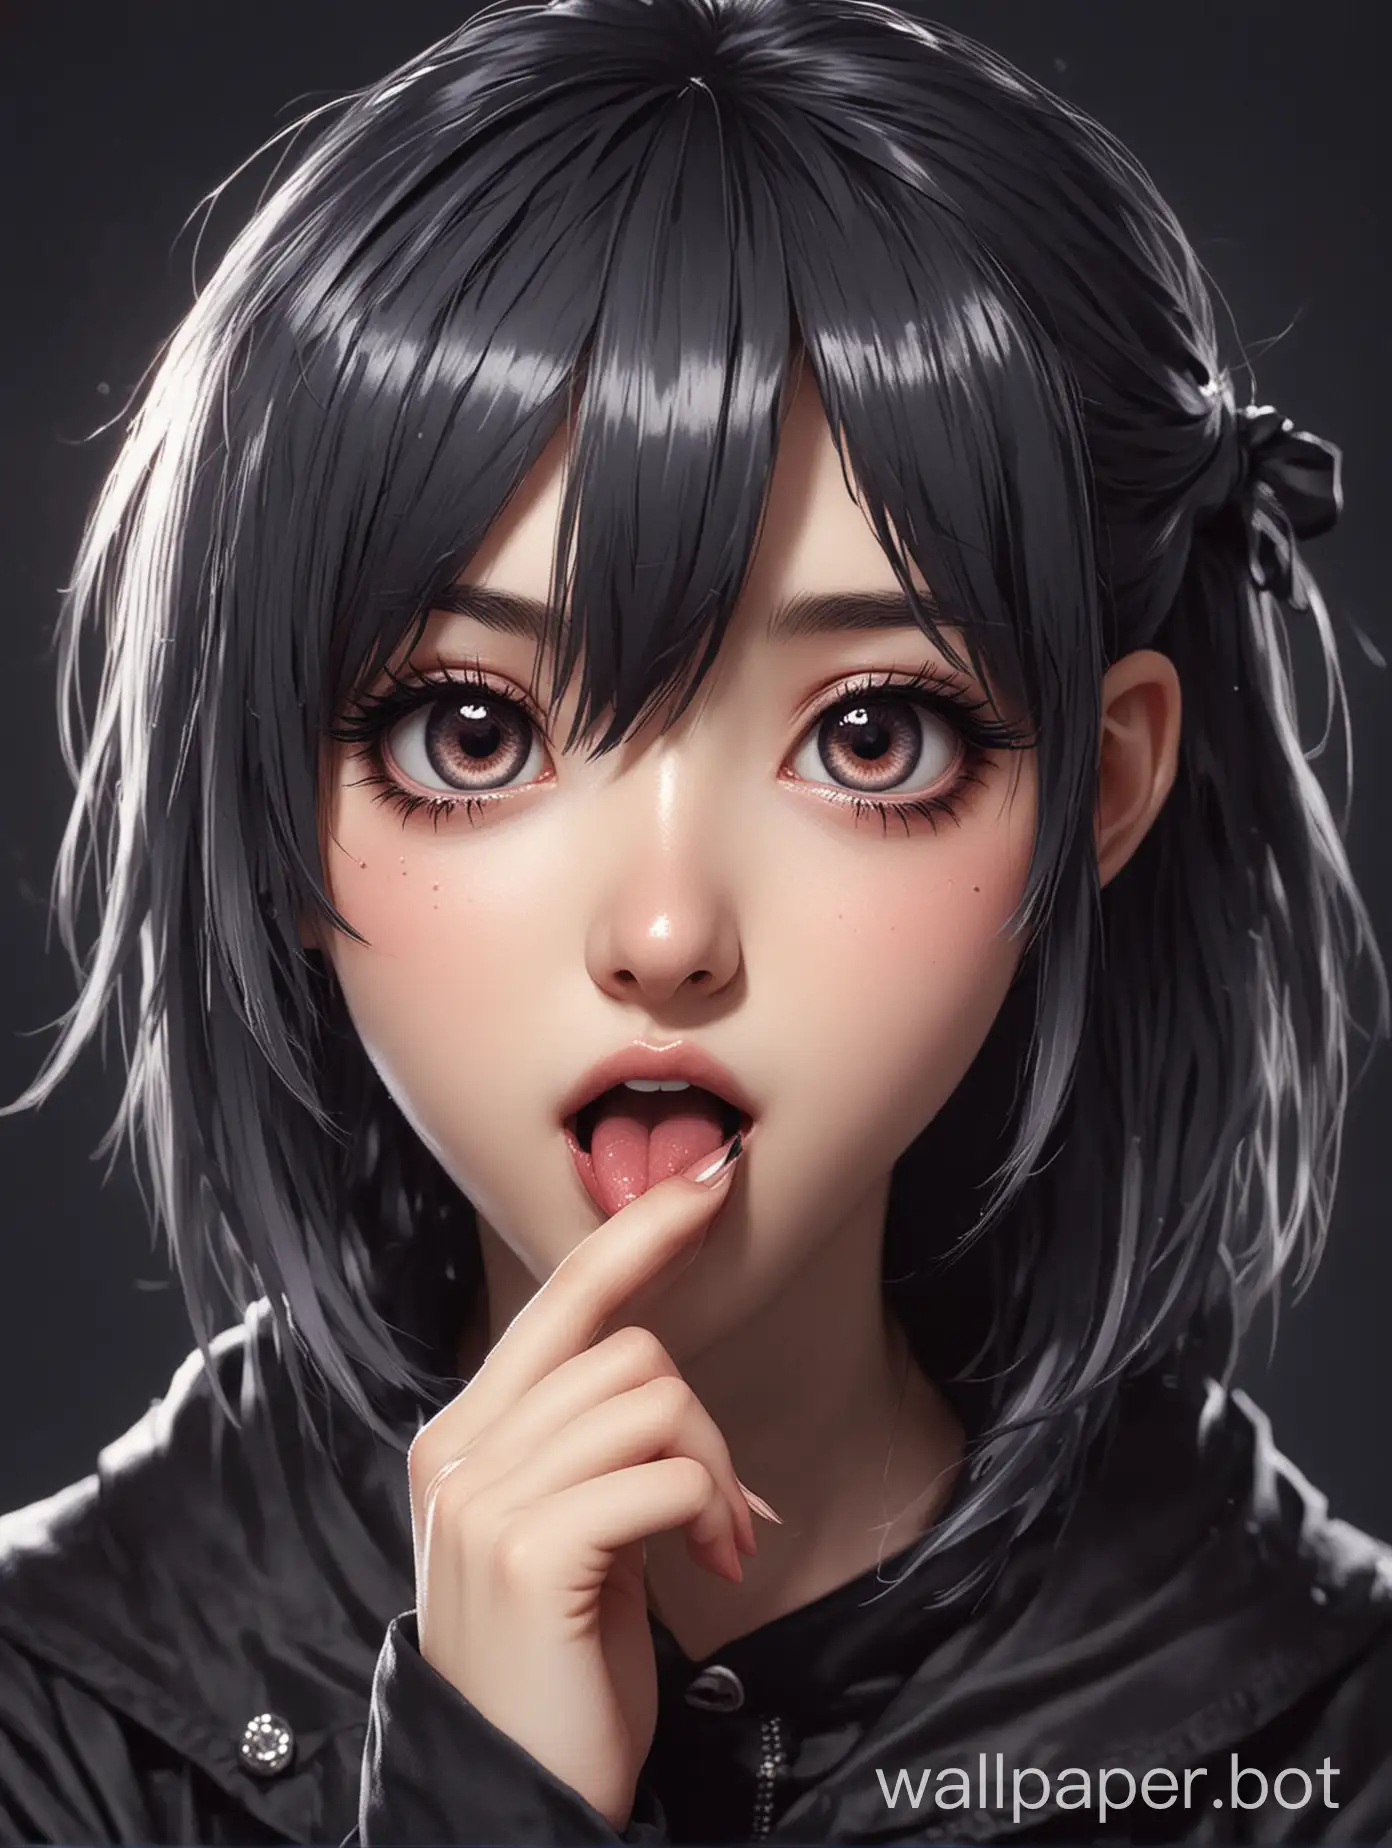 Adorable-Gothic-Anime-Girl-with-Playful-Tongue-Out-Gesture